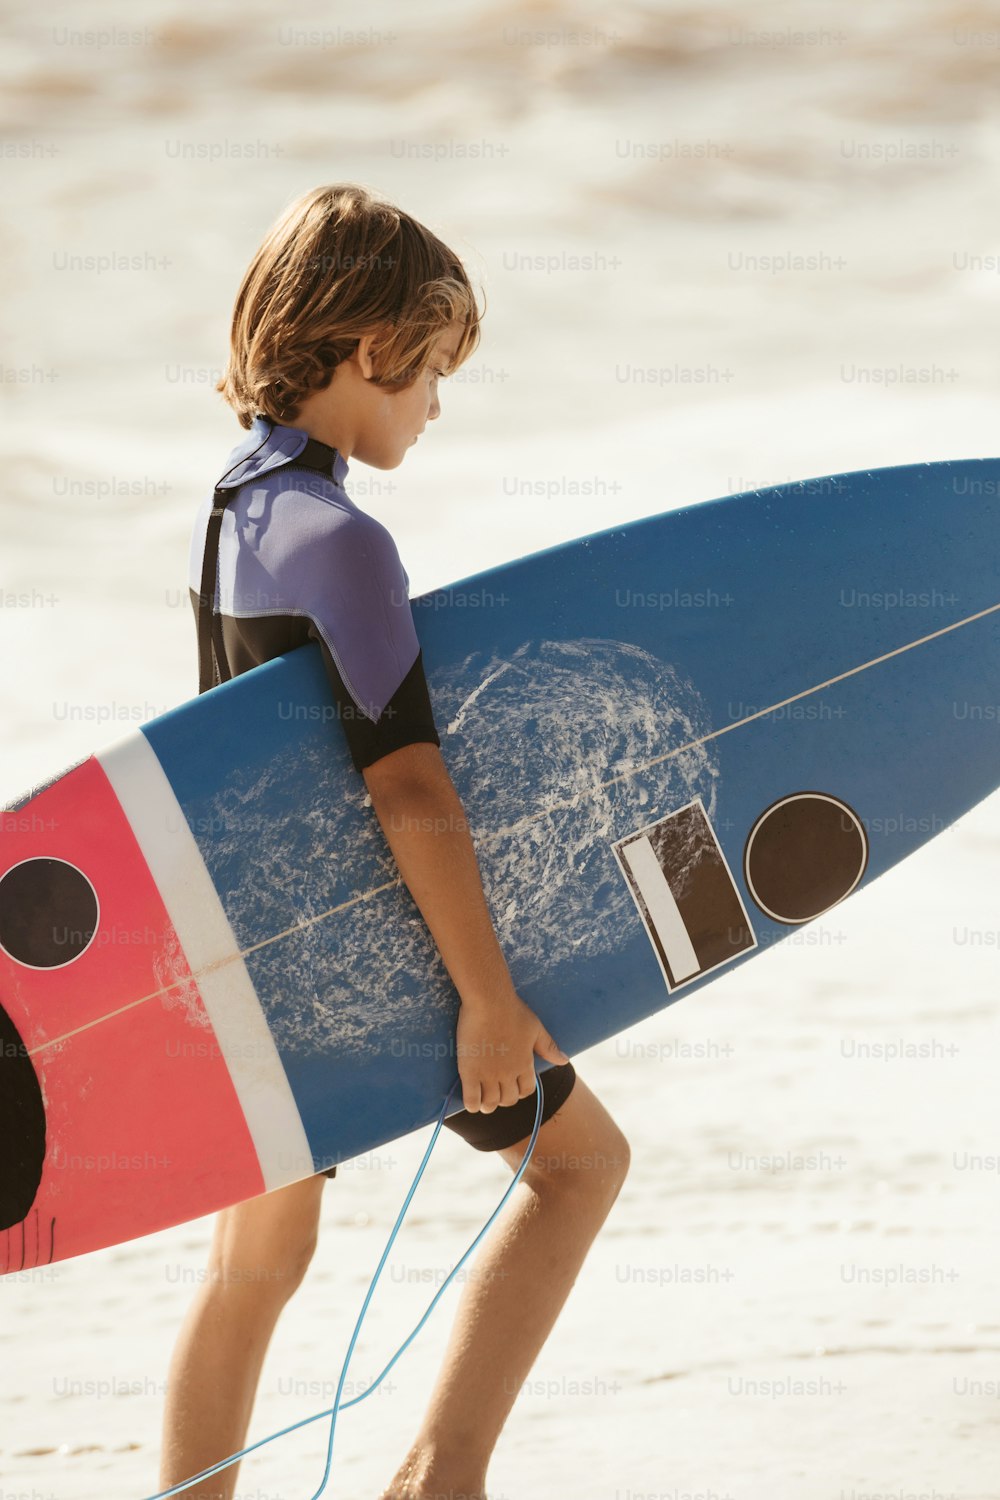 a young boy carrying a surfboard on the beach